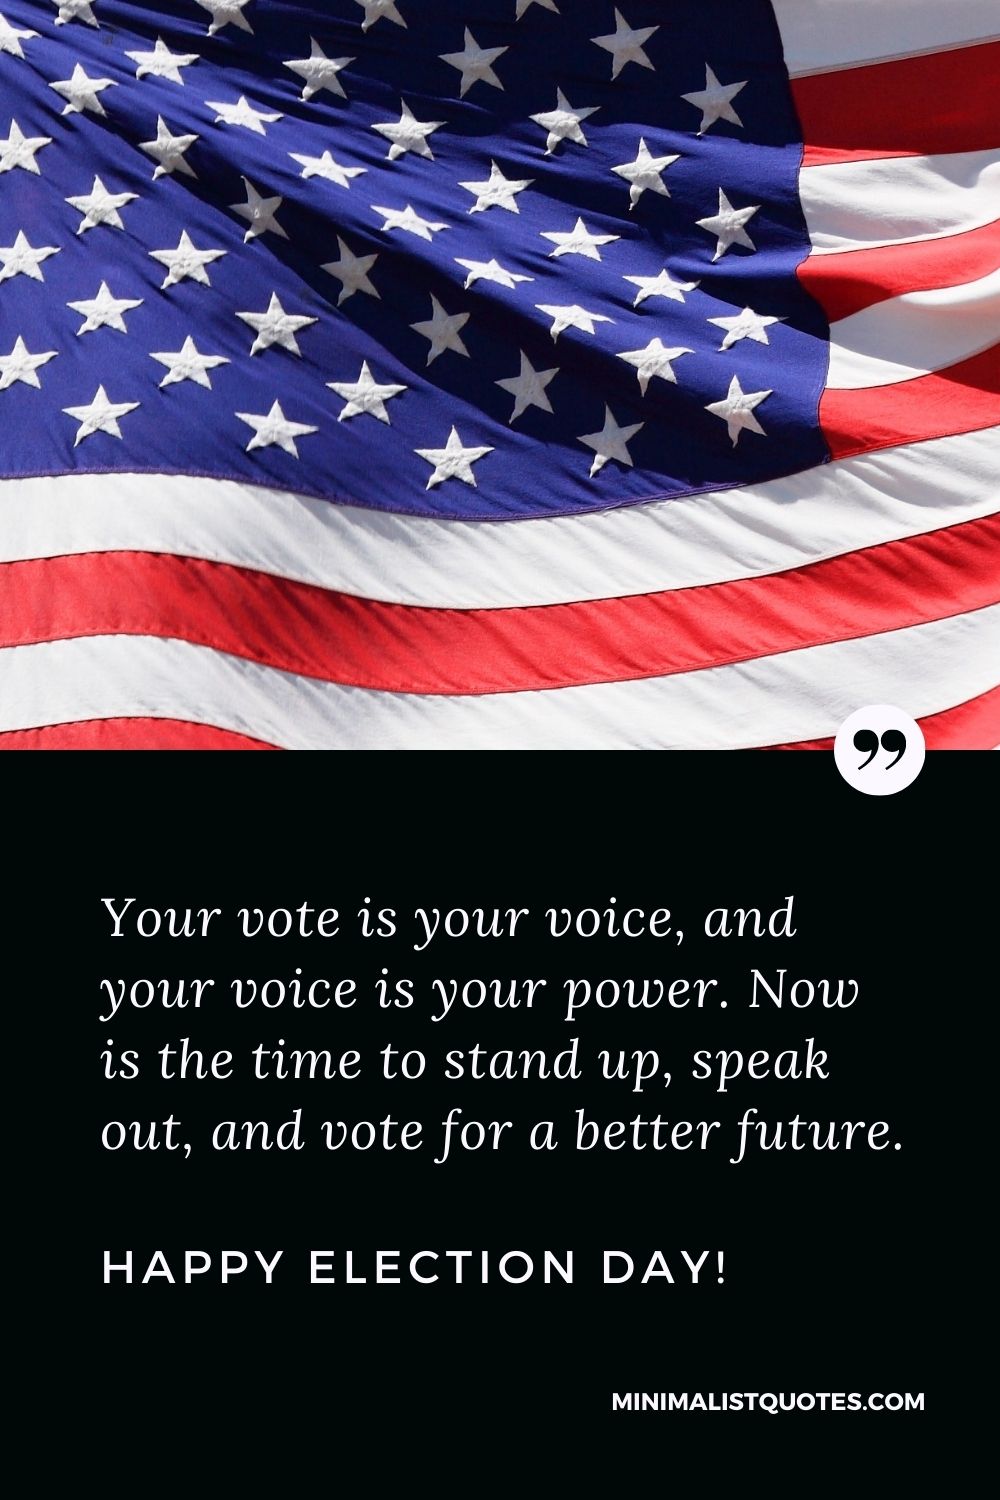 Election Day Quote, Wish & Message With Image: Your vote is your voice, and your voice is your power. Now is the time to stand up, speak out, and vote for a better future. Happy Election Day!